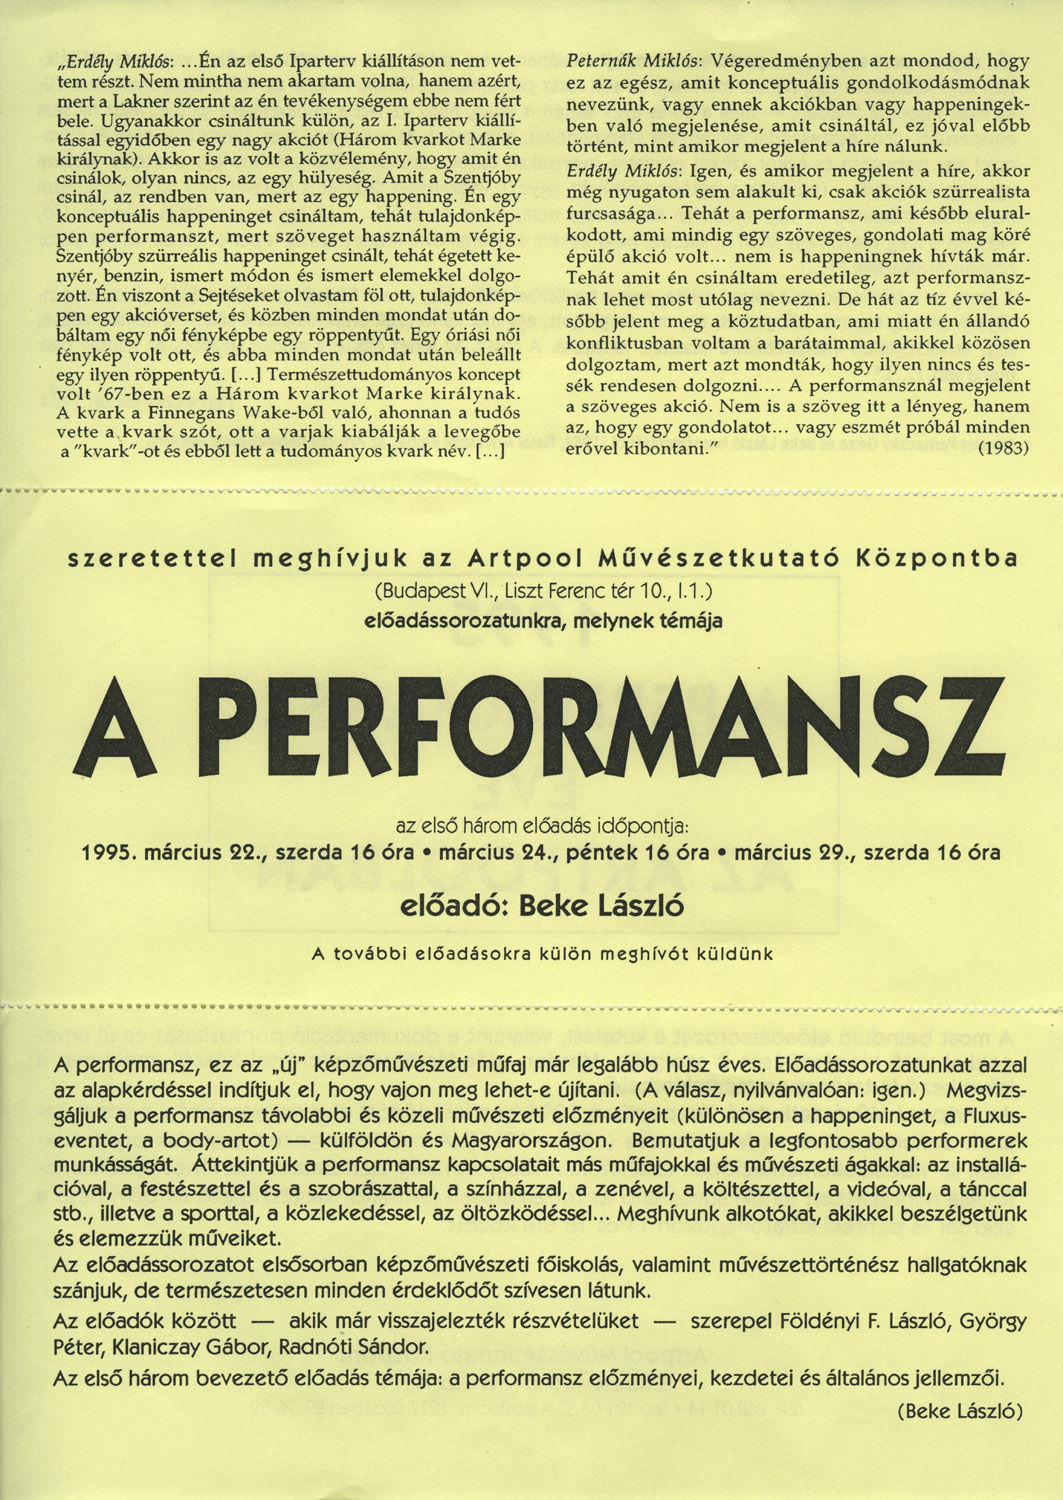 Poster/invitation announcing the Year of Performance at Artpool and inviting to the first lecture by László Beke, Artpool Art Research Center, Budapest, 1995 (first and second page)